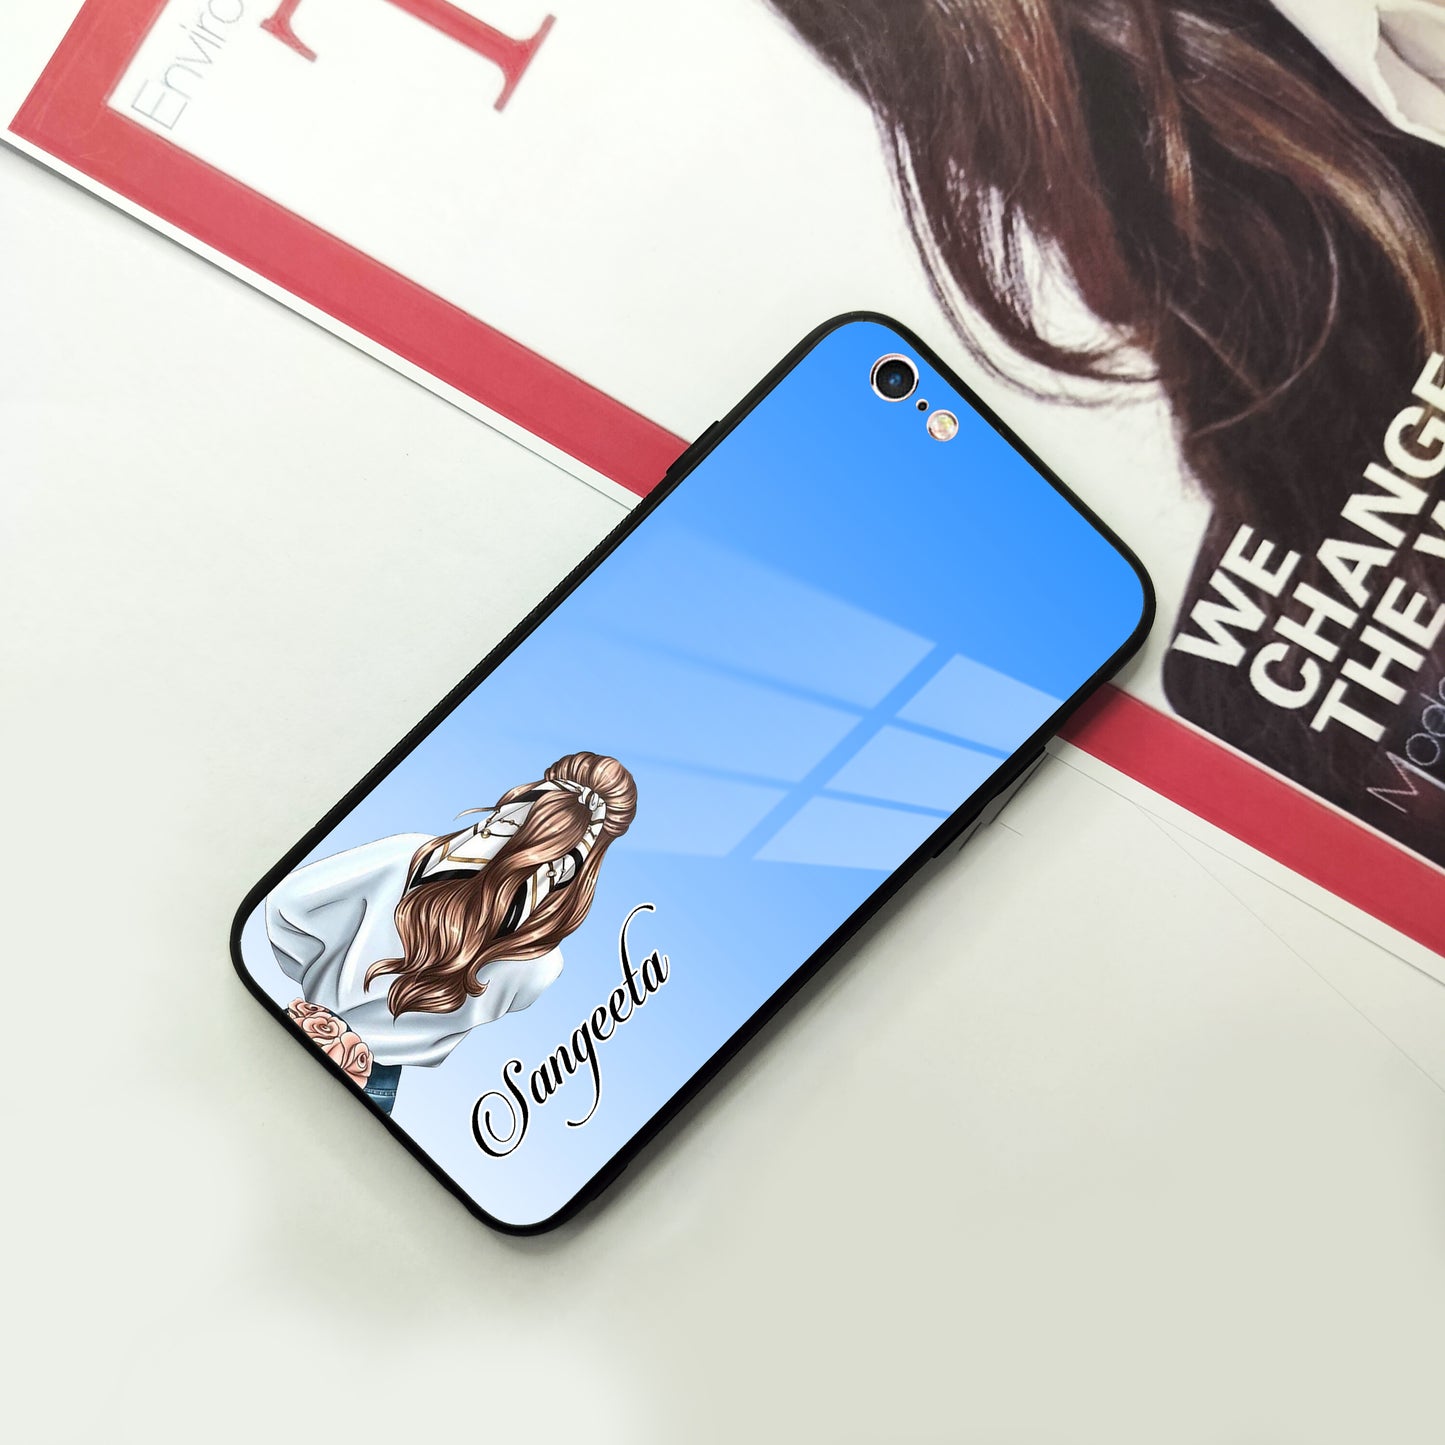 Styles Girl Glass Case For iPhone